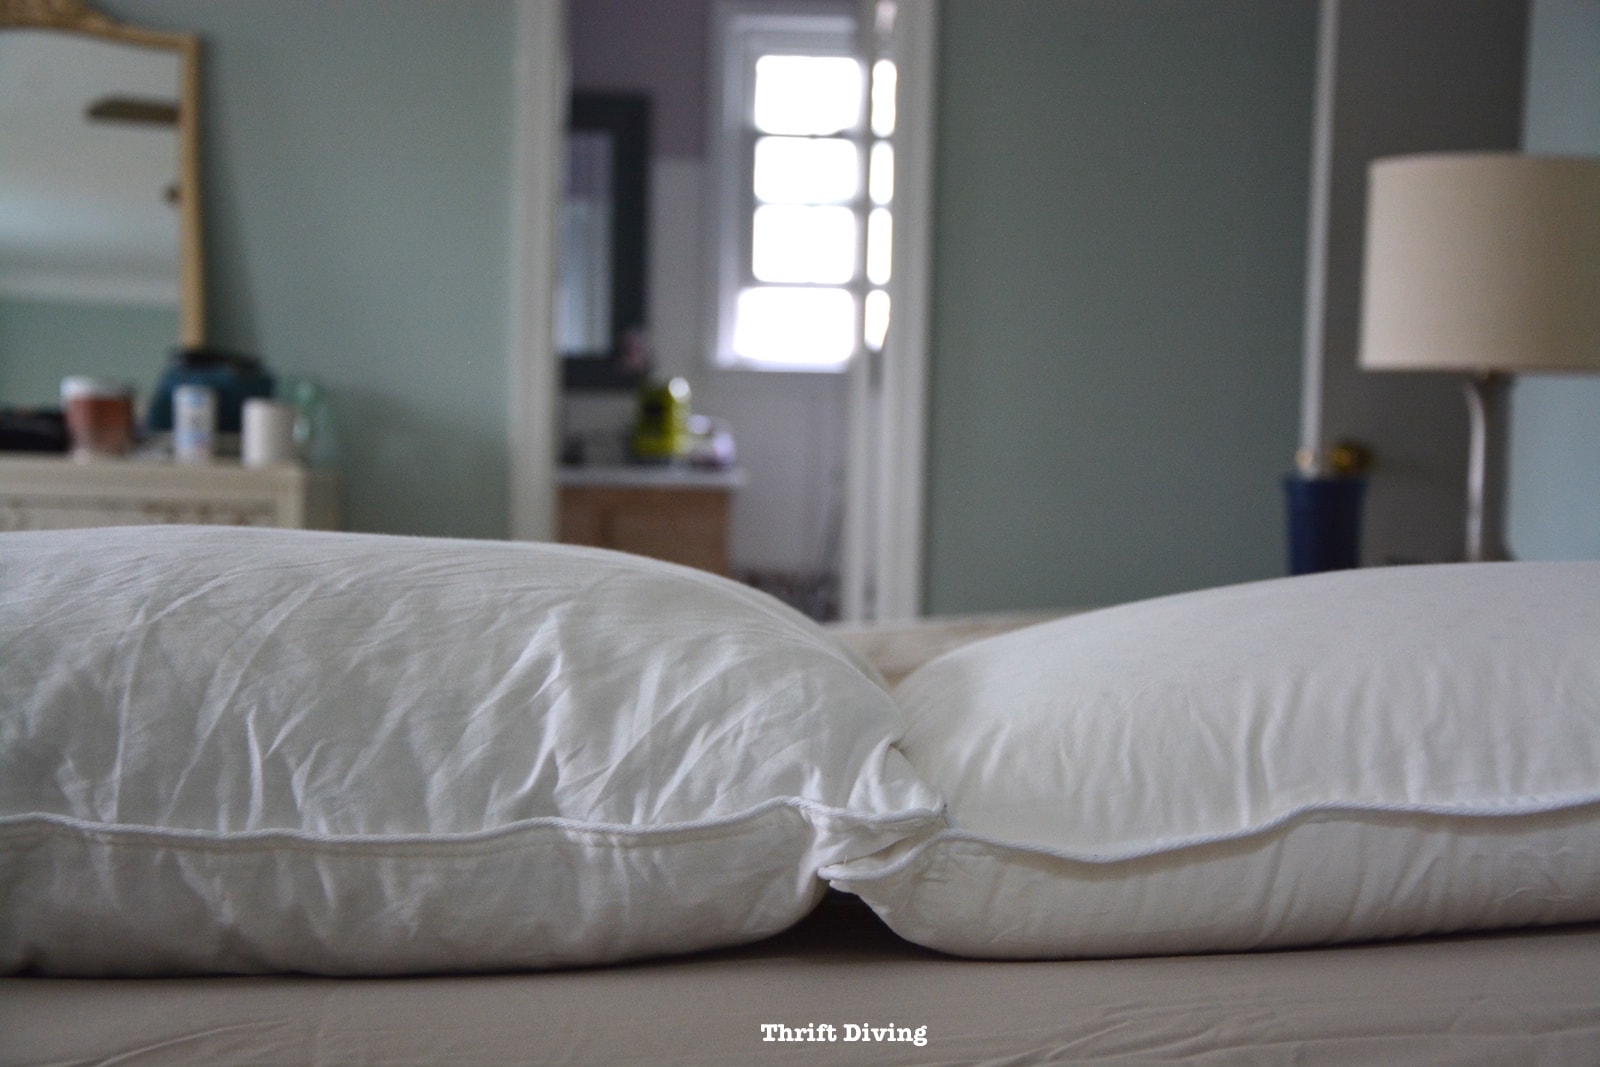 Are Brentwood pillows worth it? A Brentwood Home pillows review - Helena vs Carmel pillow. - Thrift Diving